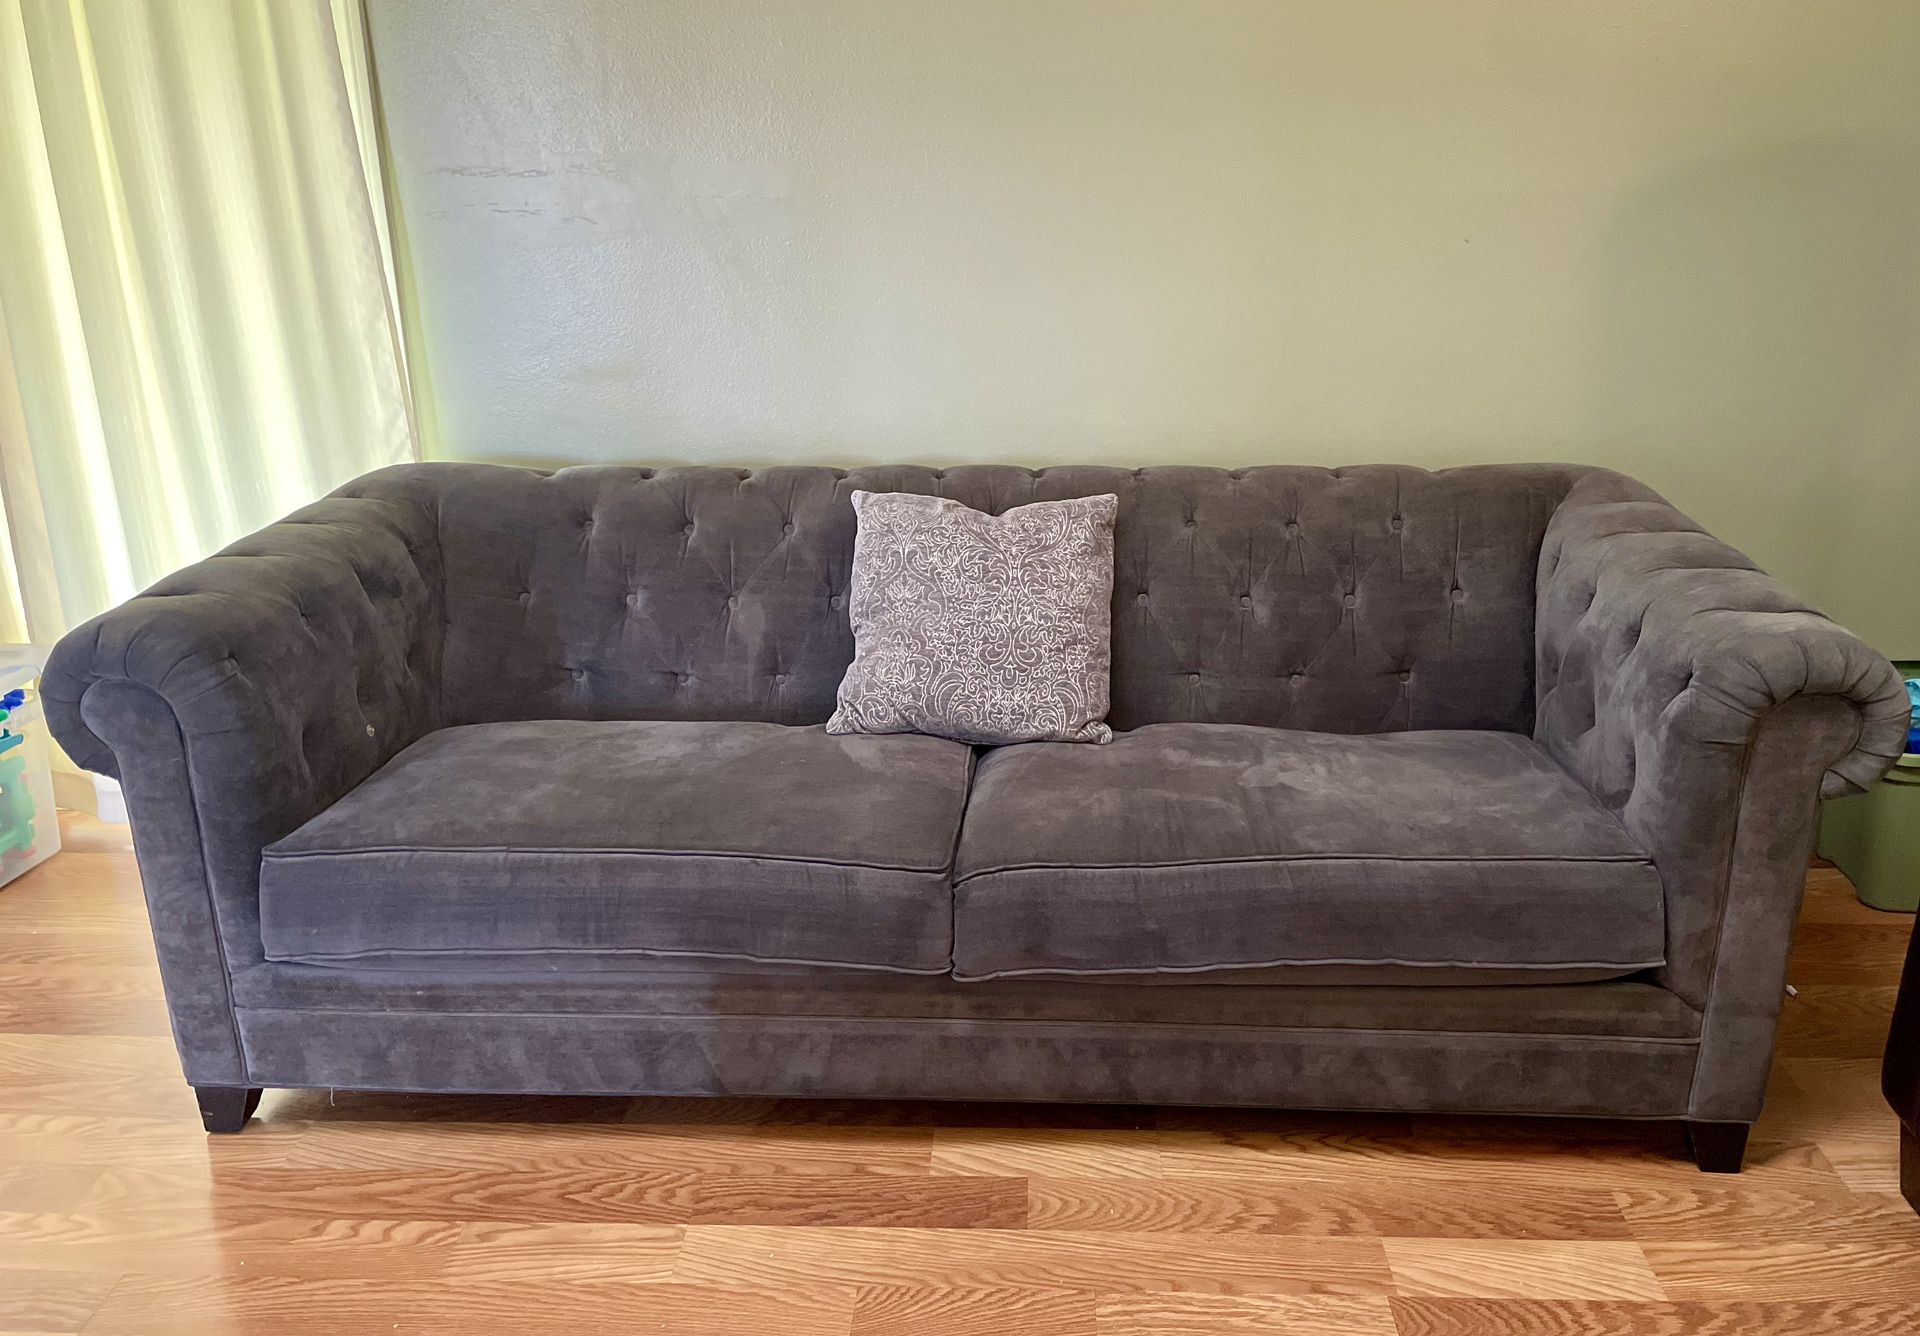 Large & beautiful Couch/ Sofa